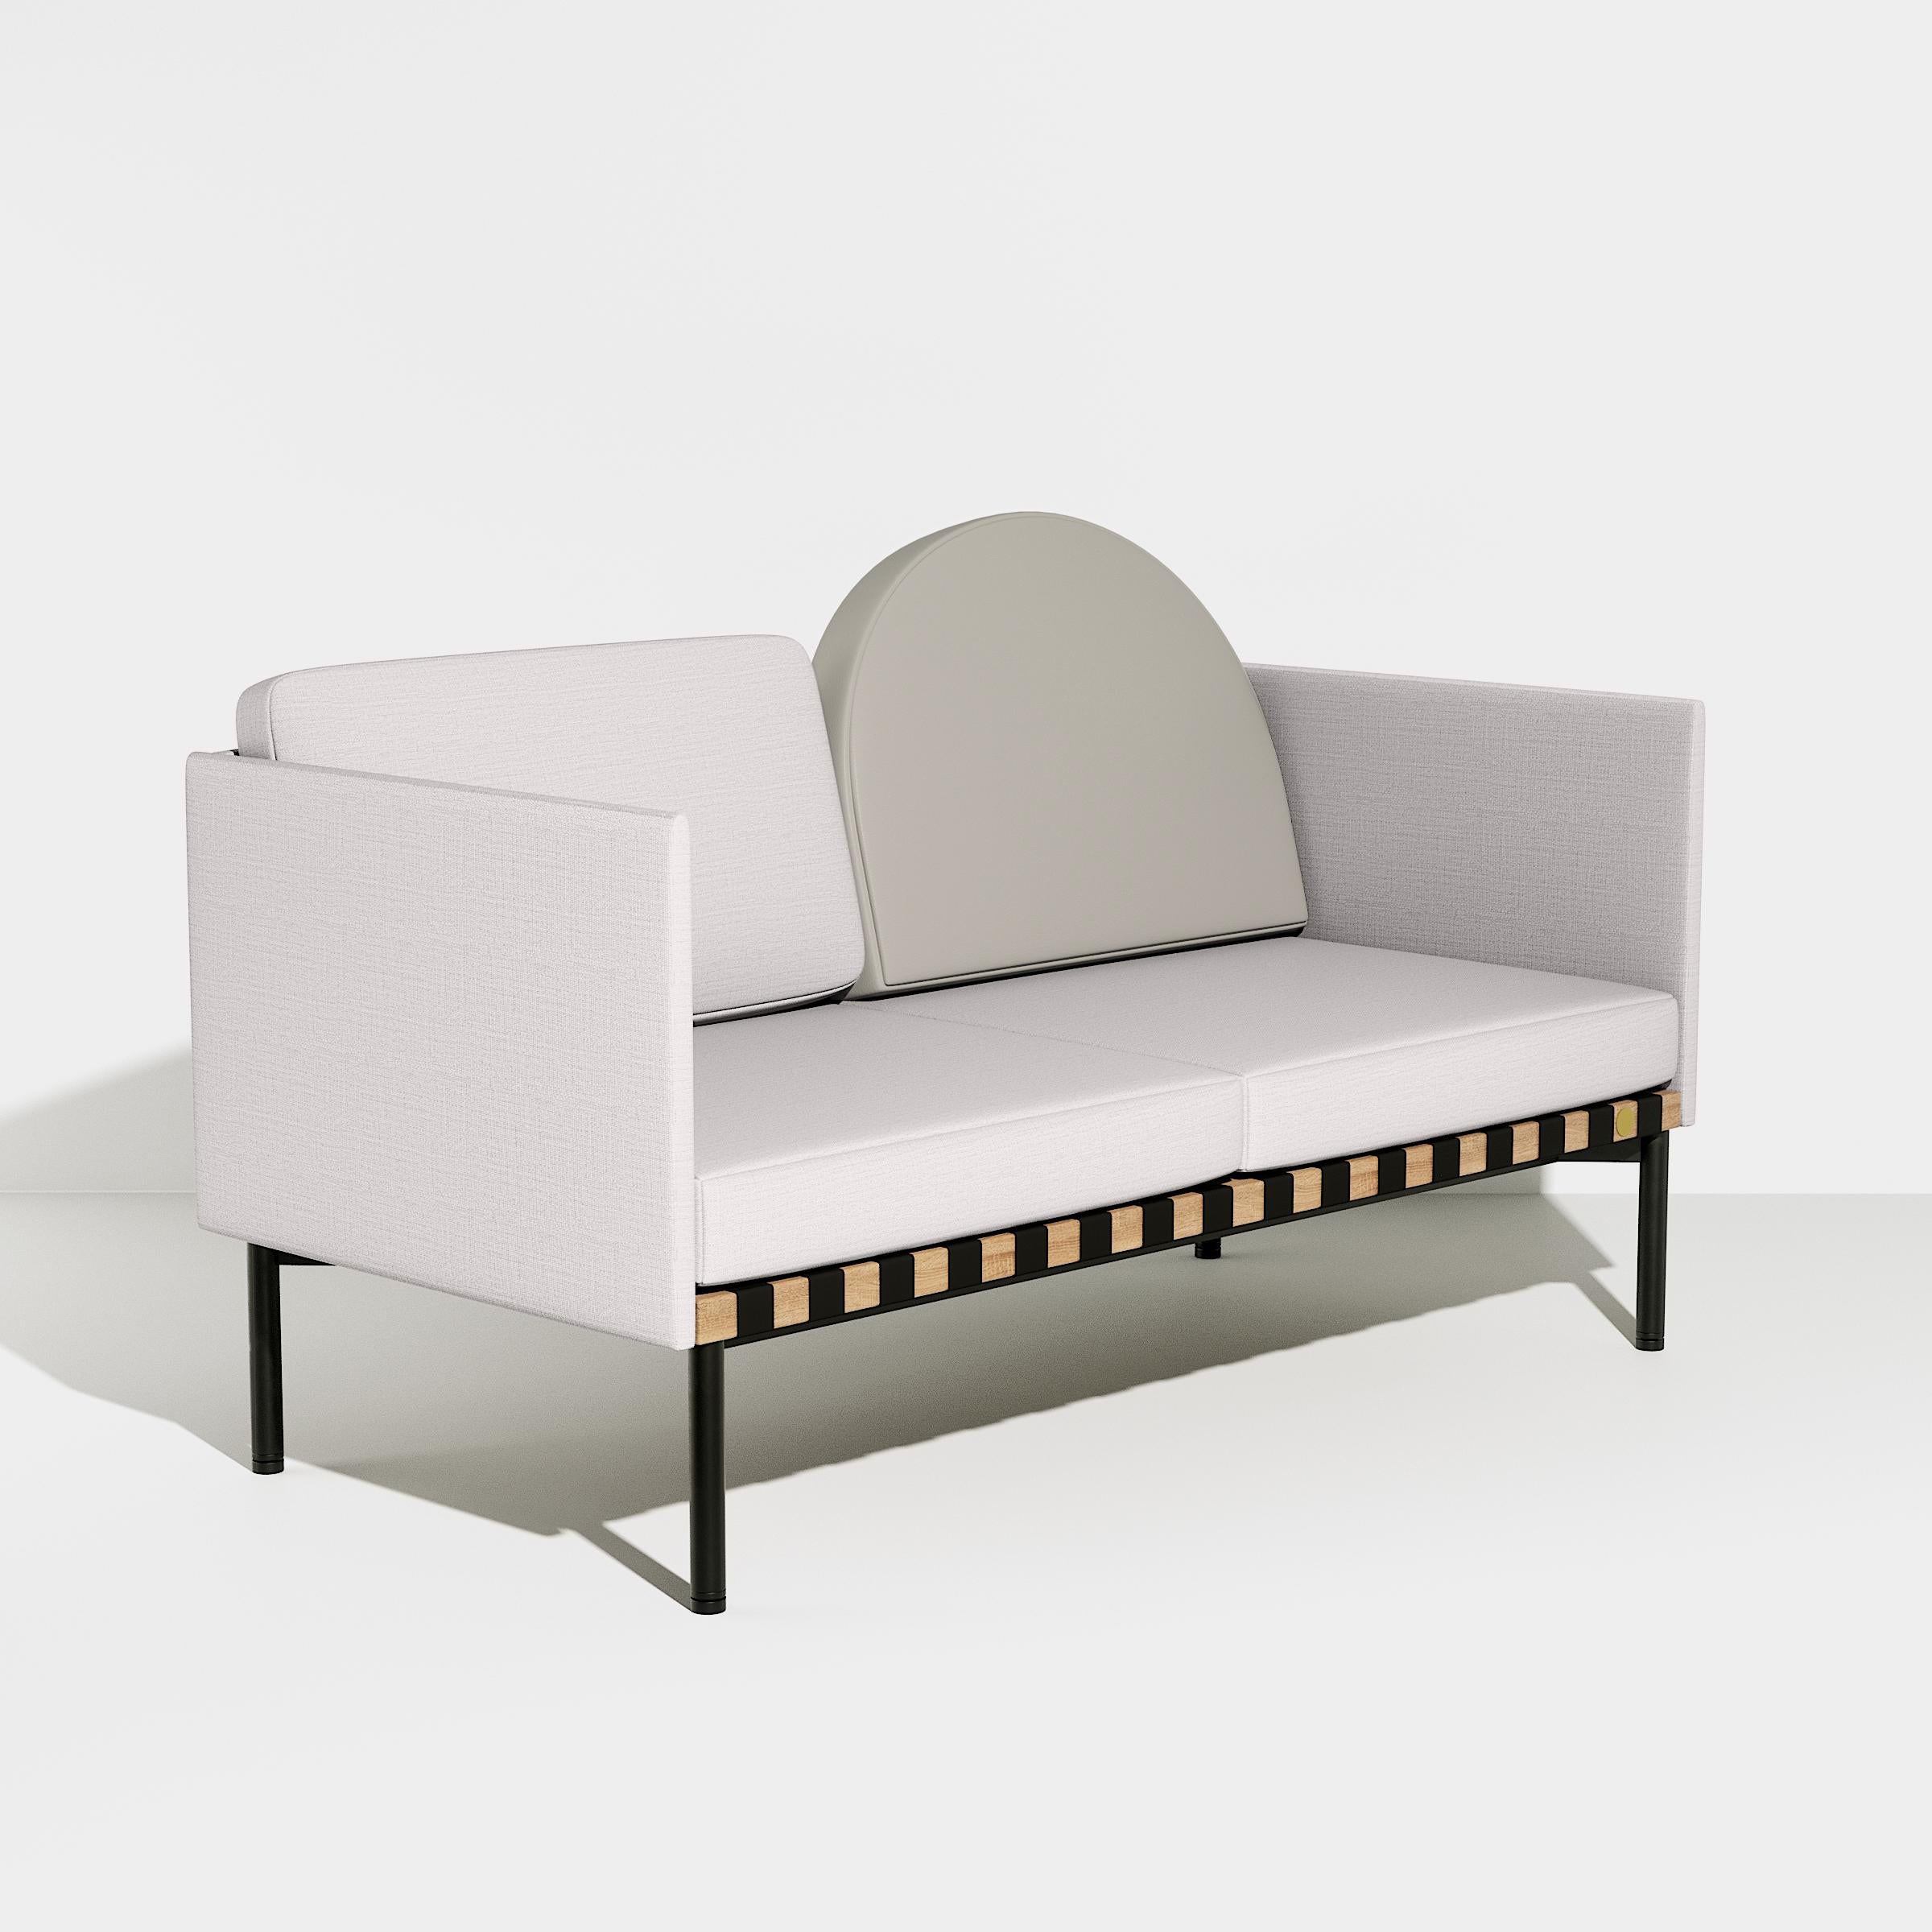 Petite Friture Grid 2 Seater Sofa with Armrest in Grey-blue by Studio Pool, 2015

Pool designed the Grid collection in reference to the Bauhaus style and in honour of the graphic talents. Each element of this all-modular system retains the